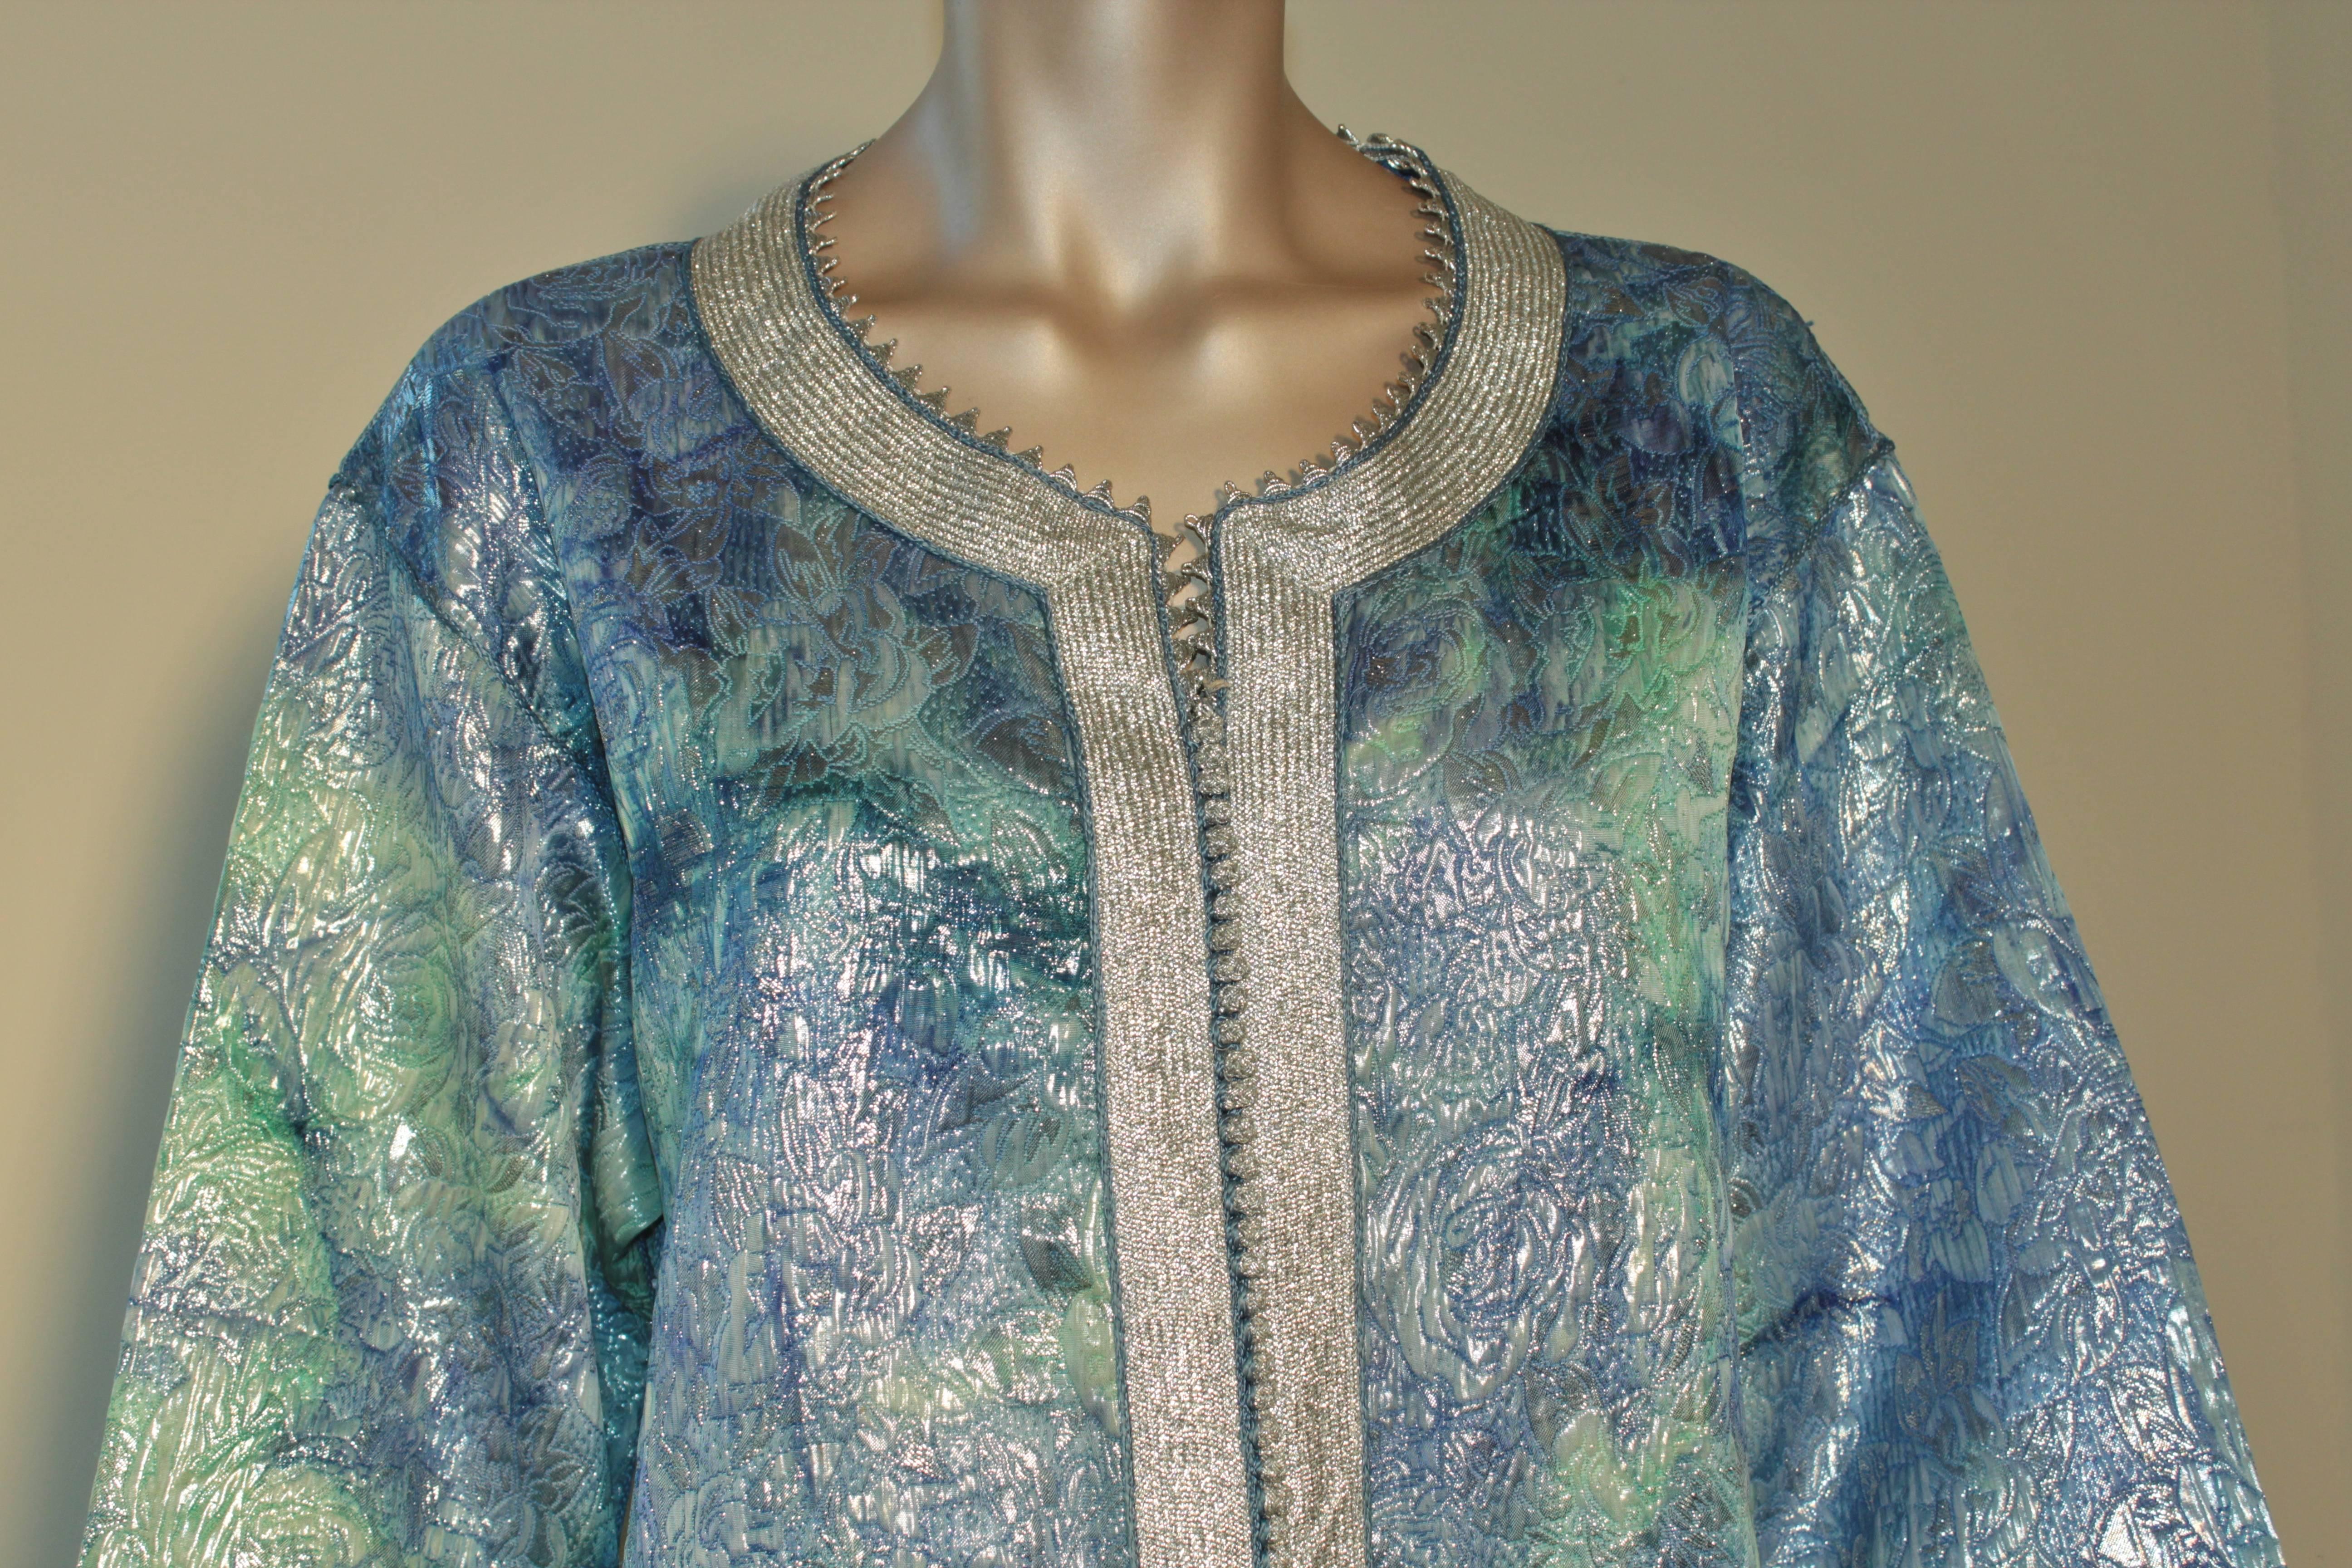 Elegant vintage Moroccan Moorish caftan. brocade metallic aquamarine blue embroidered with silver threads.
Maxi dress gown circa 1970s.
This vintage Moorish kaftan is embroidered and embellished entirely by hand.
One of a kind evening Moroccan